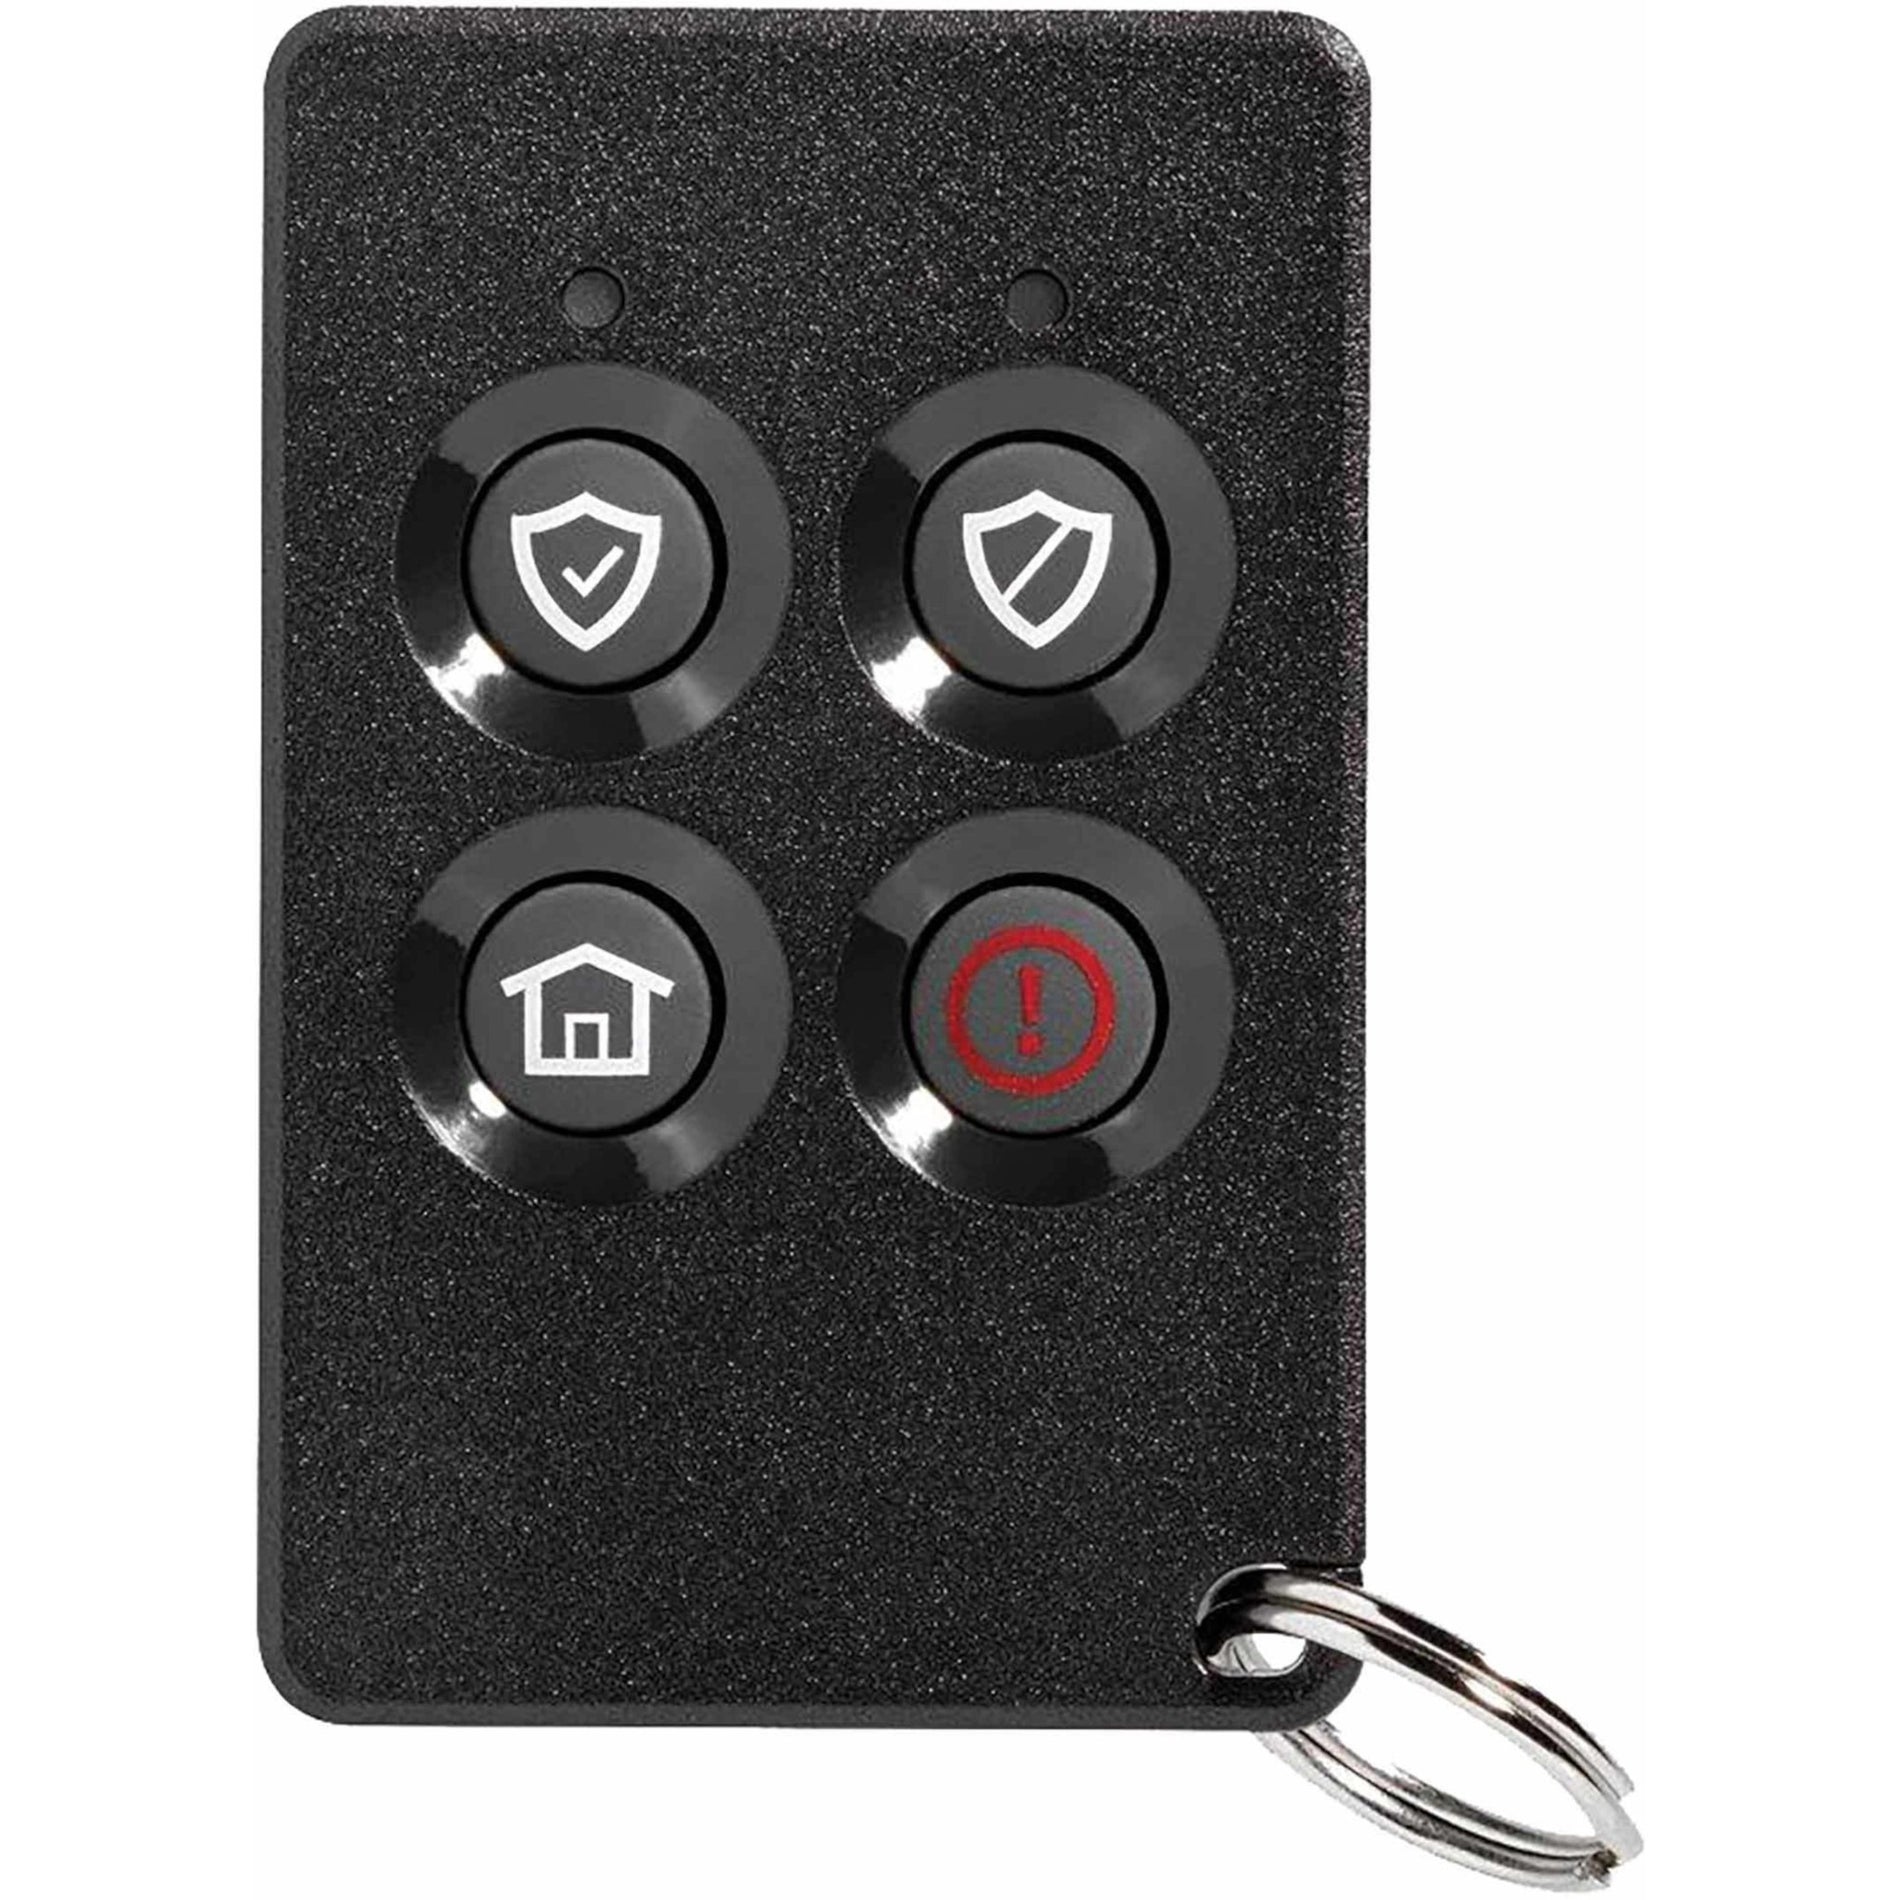 Honeywell PROSIXFOB ProSeries Two-Way Wireless Key, Convenient Keyfob Transmitter for Home Security